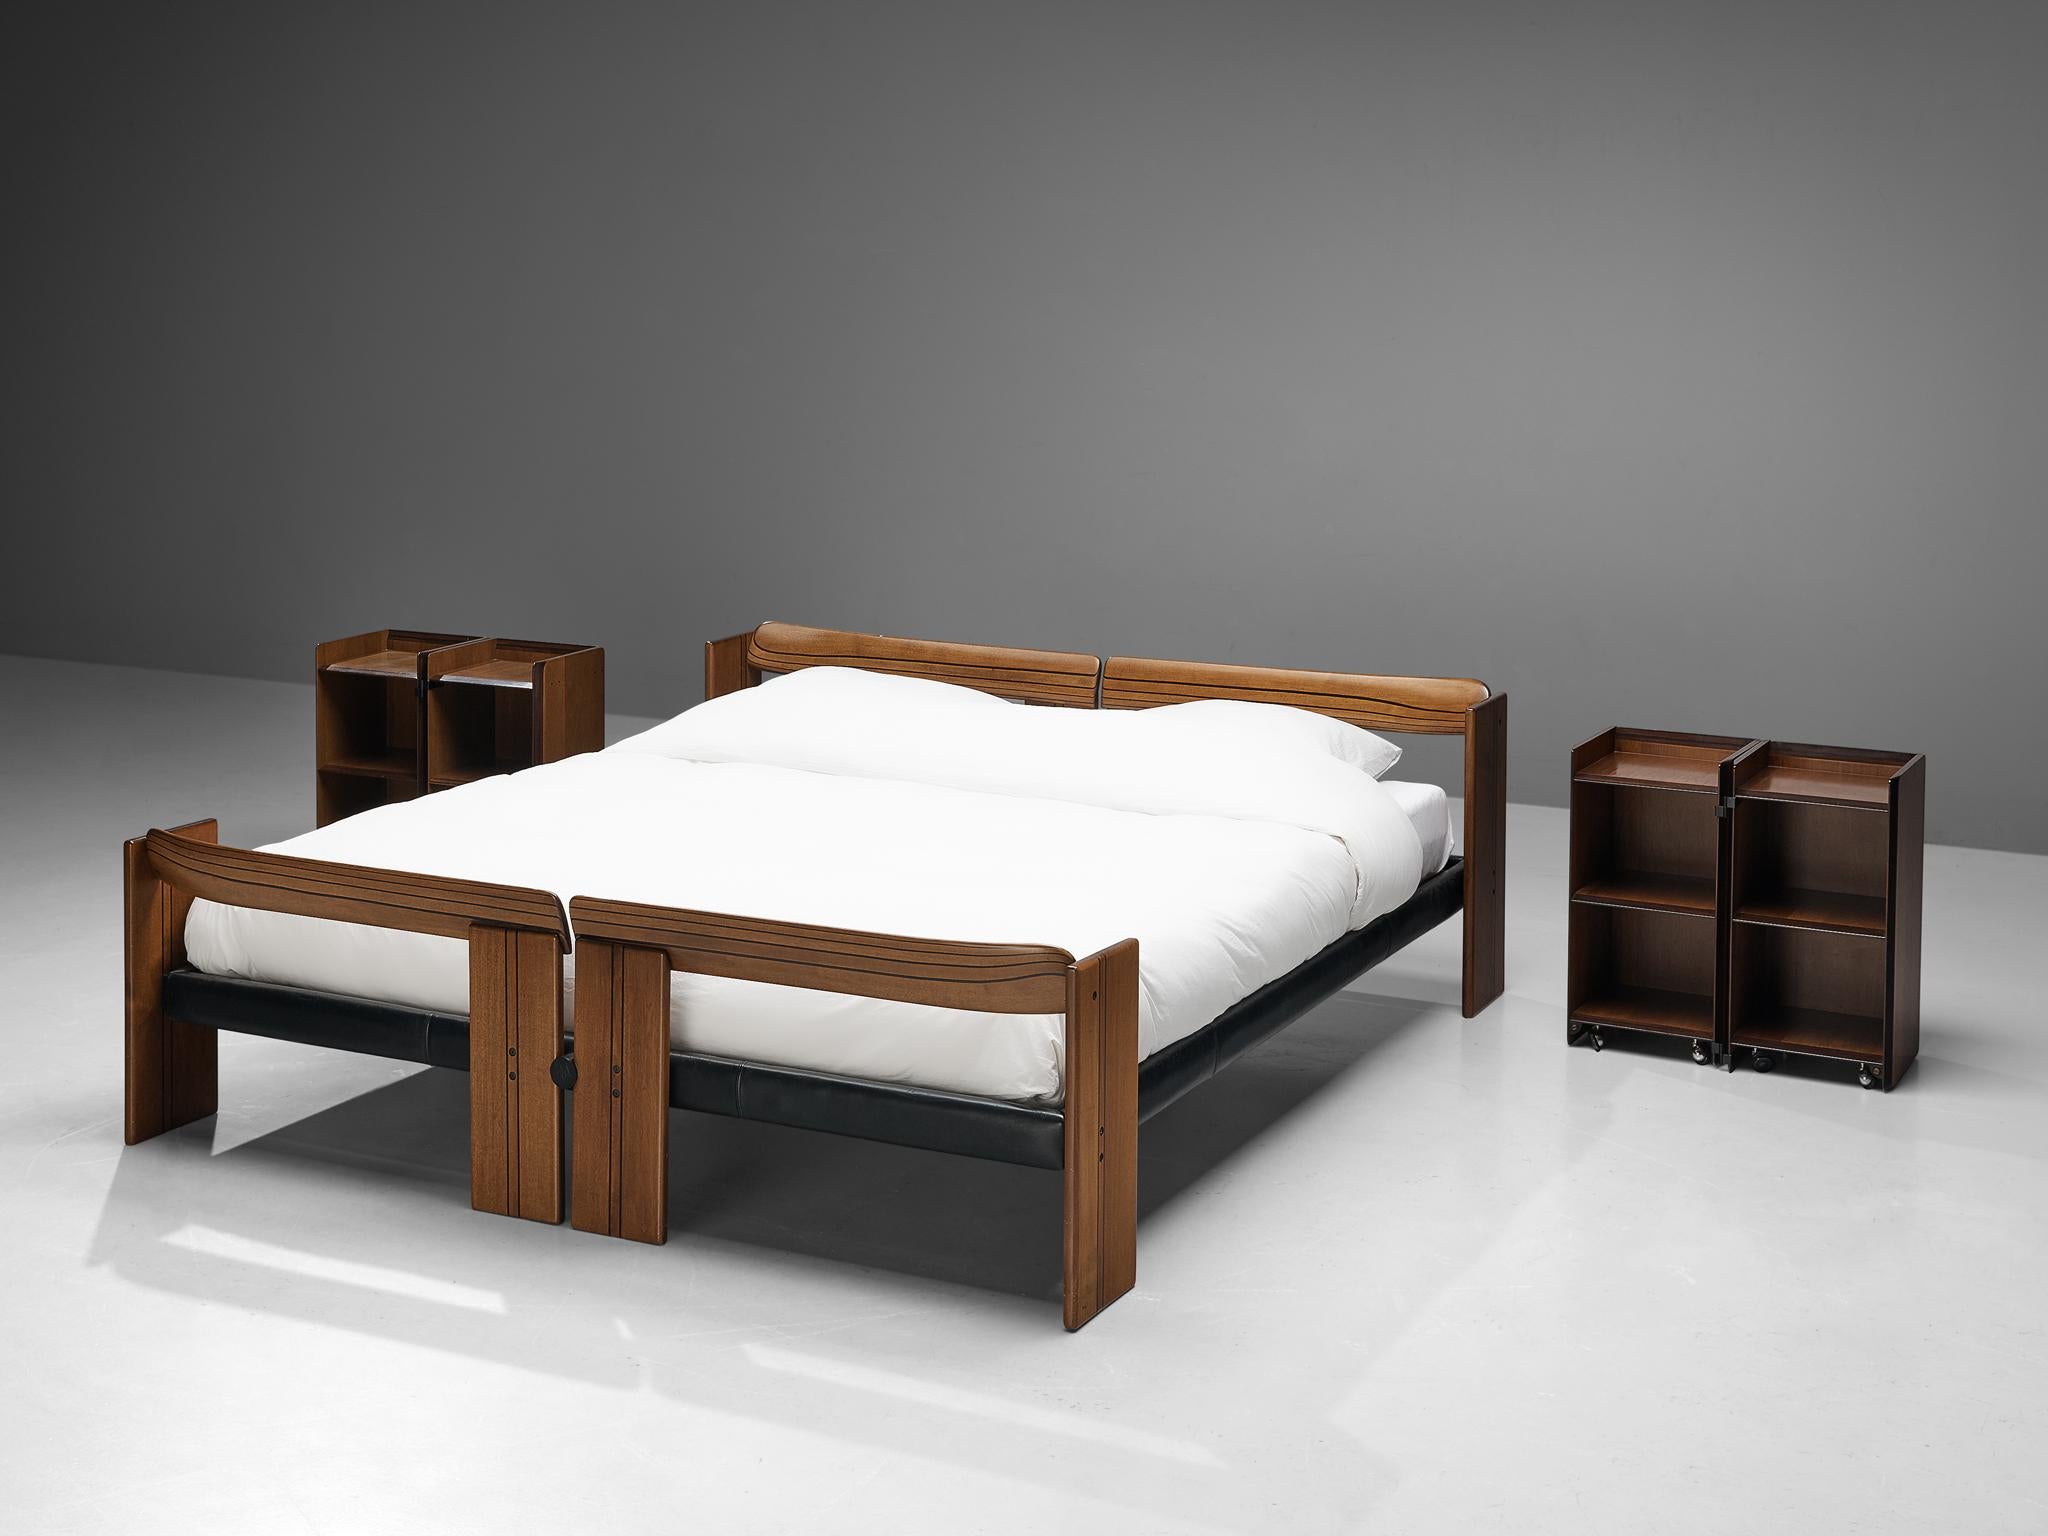 Mid-Century Modern Private listing for Cassie: Scarpa bed + nightstands